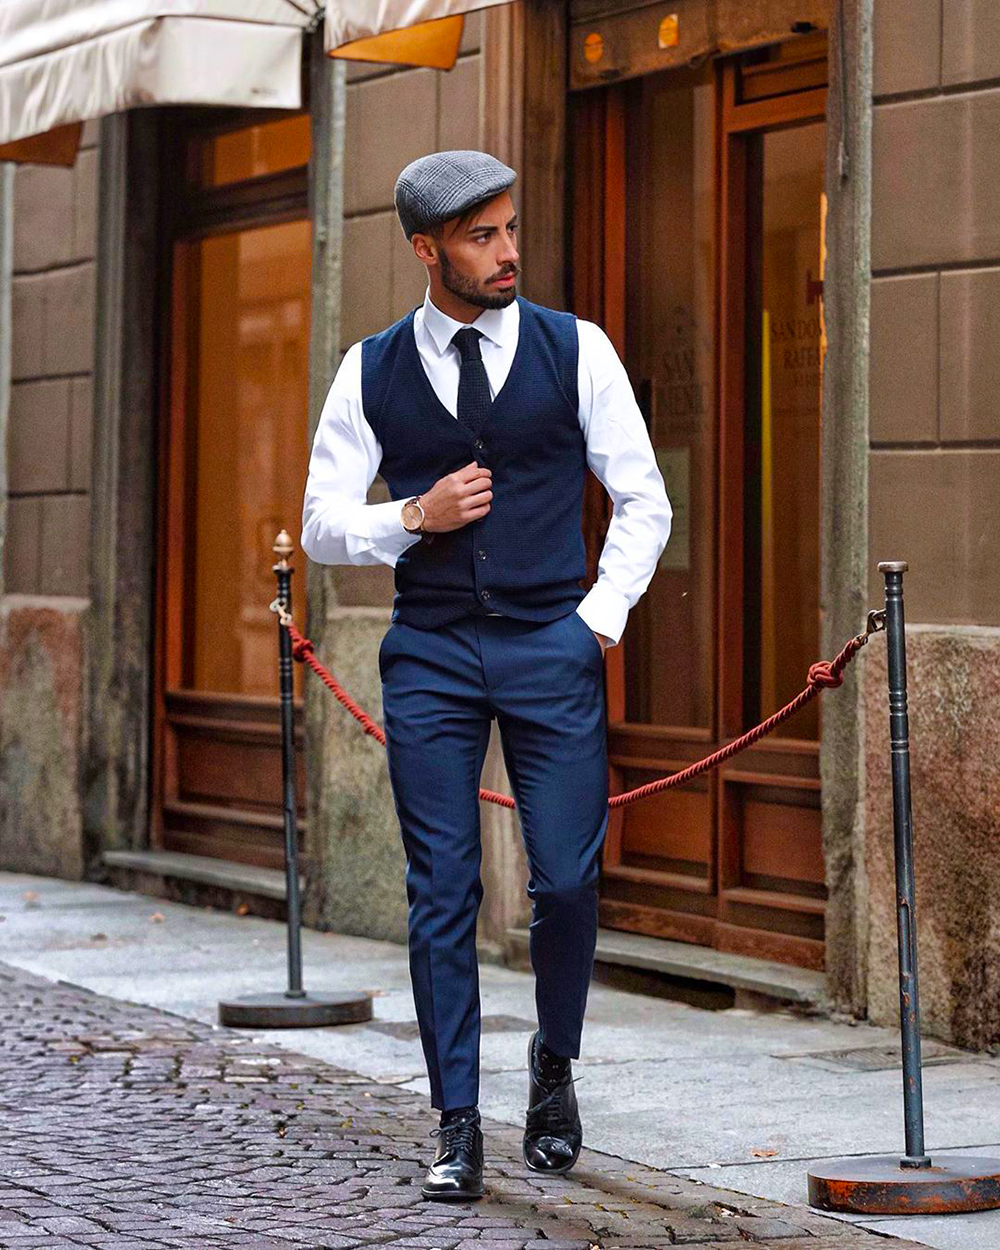 Navy waistcoat, white dress shirt, navy tie, navy dress pants, gray cap, and black derby shoes outfit